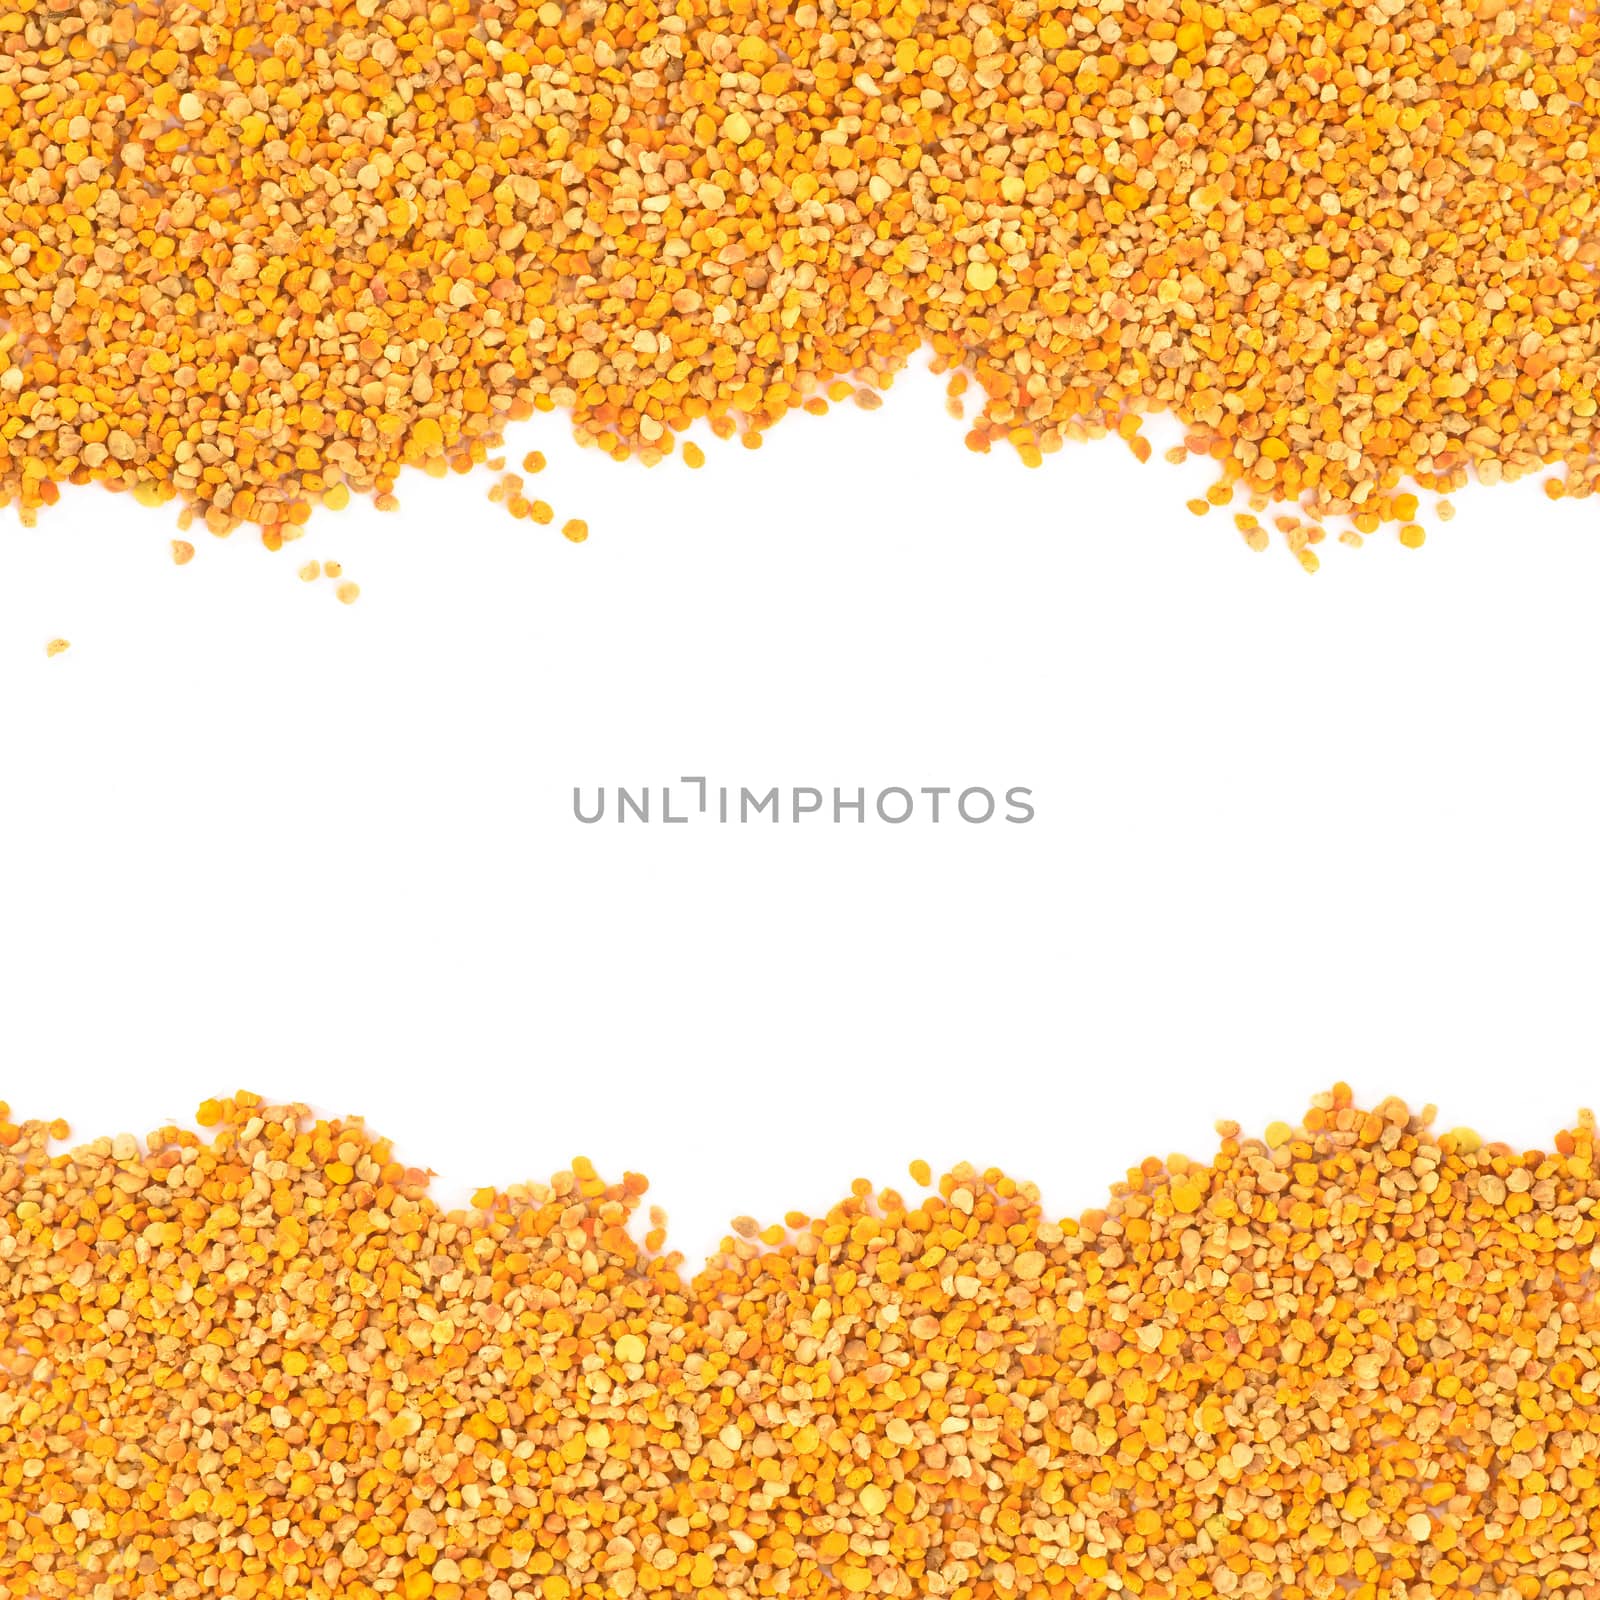 Bee pollen grains background by Carche